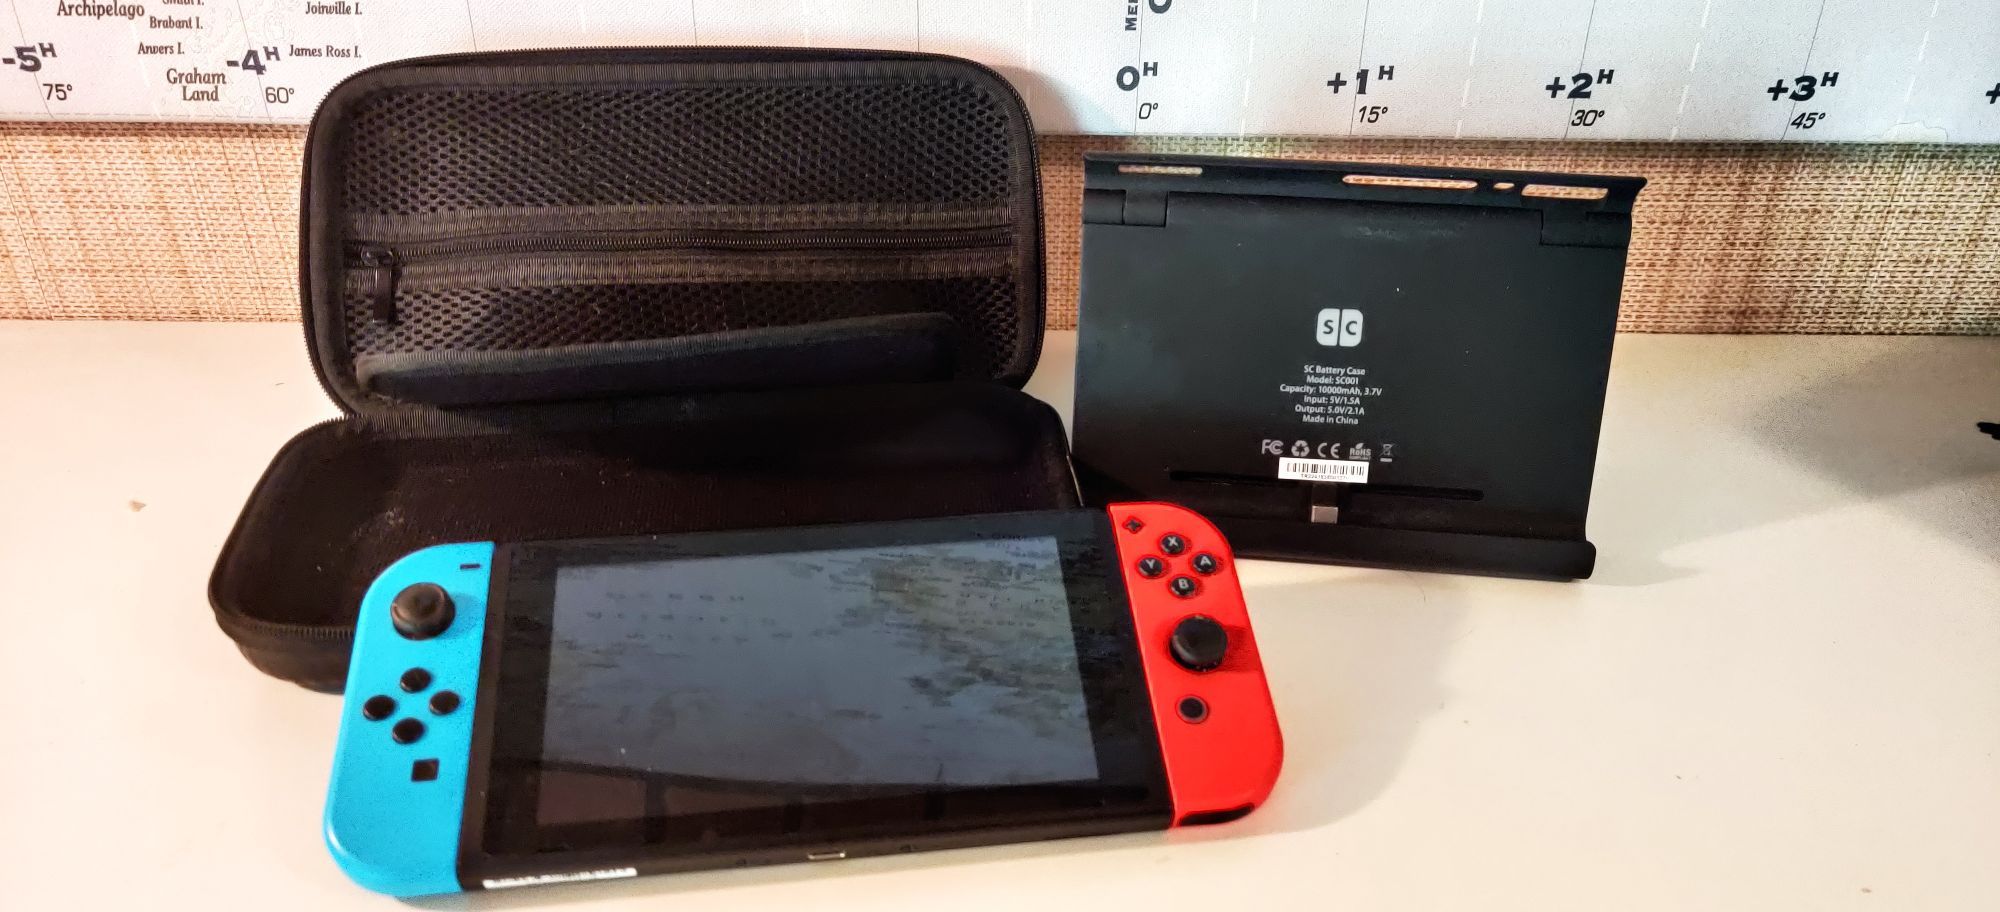 A Nintendo Switch next to a powerbank and a carrying case that's same size as Switch